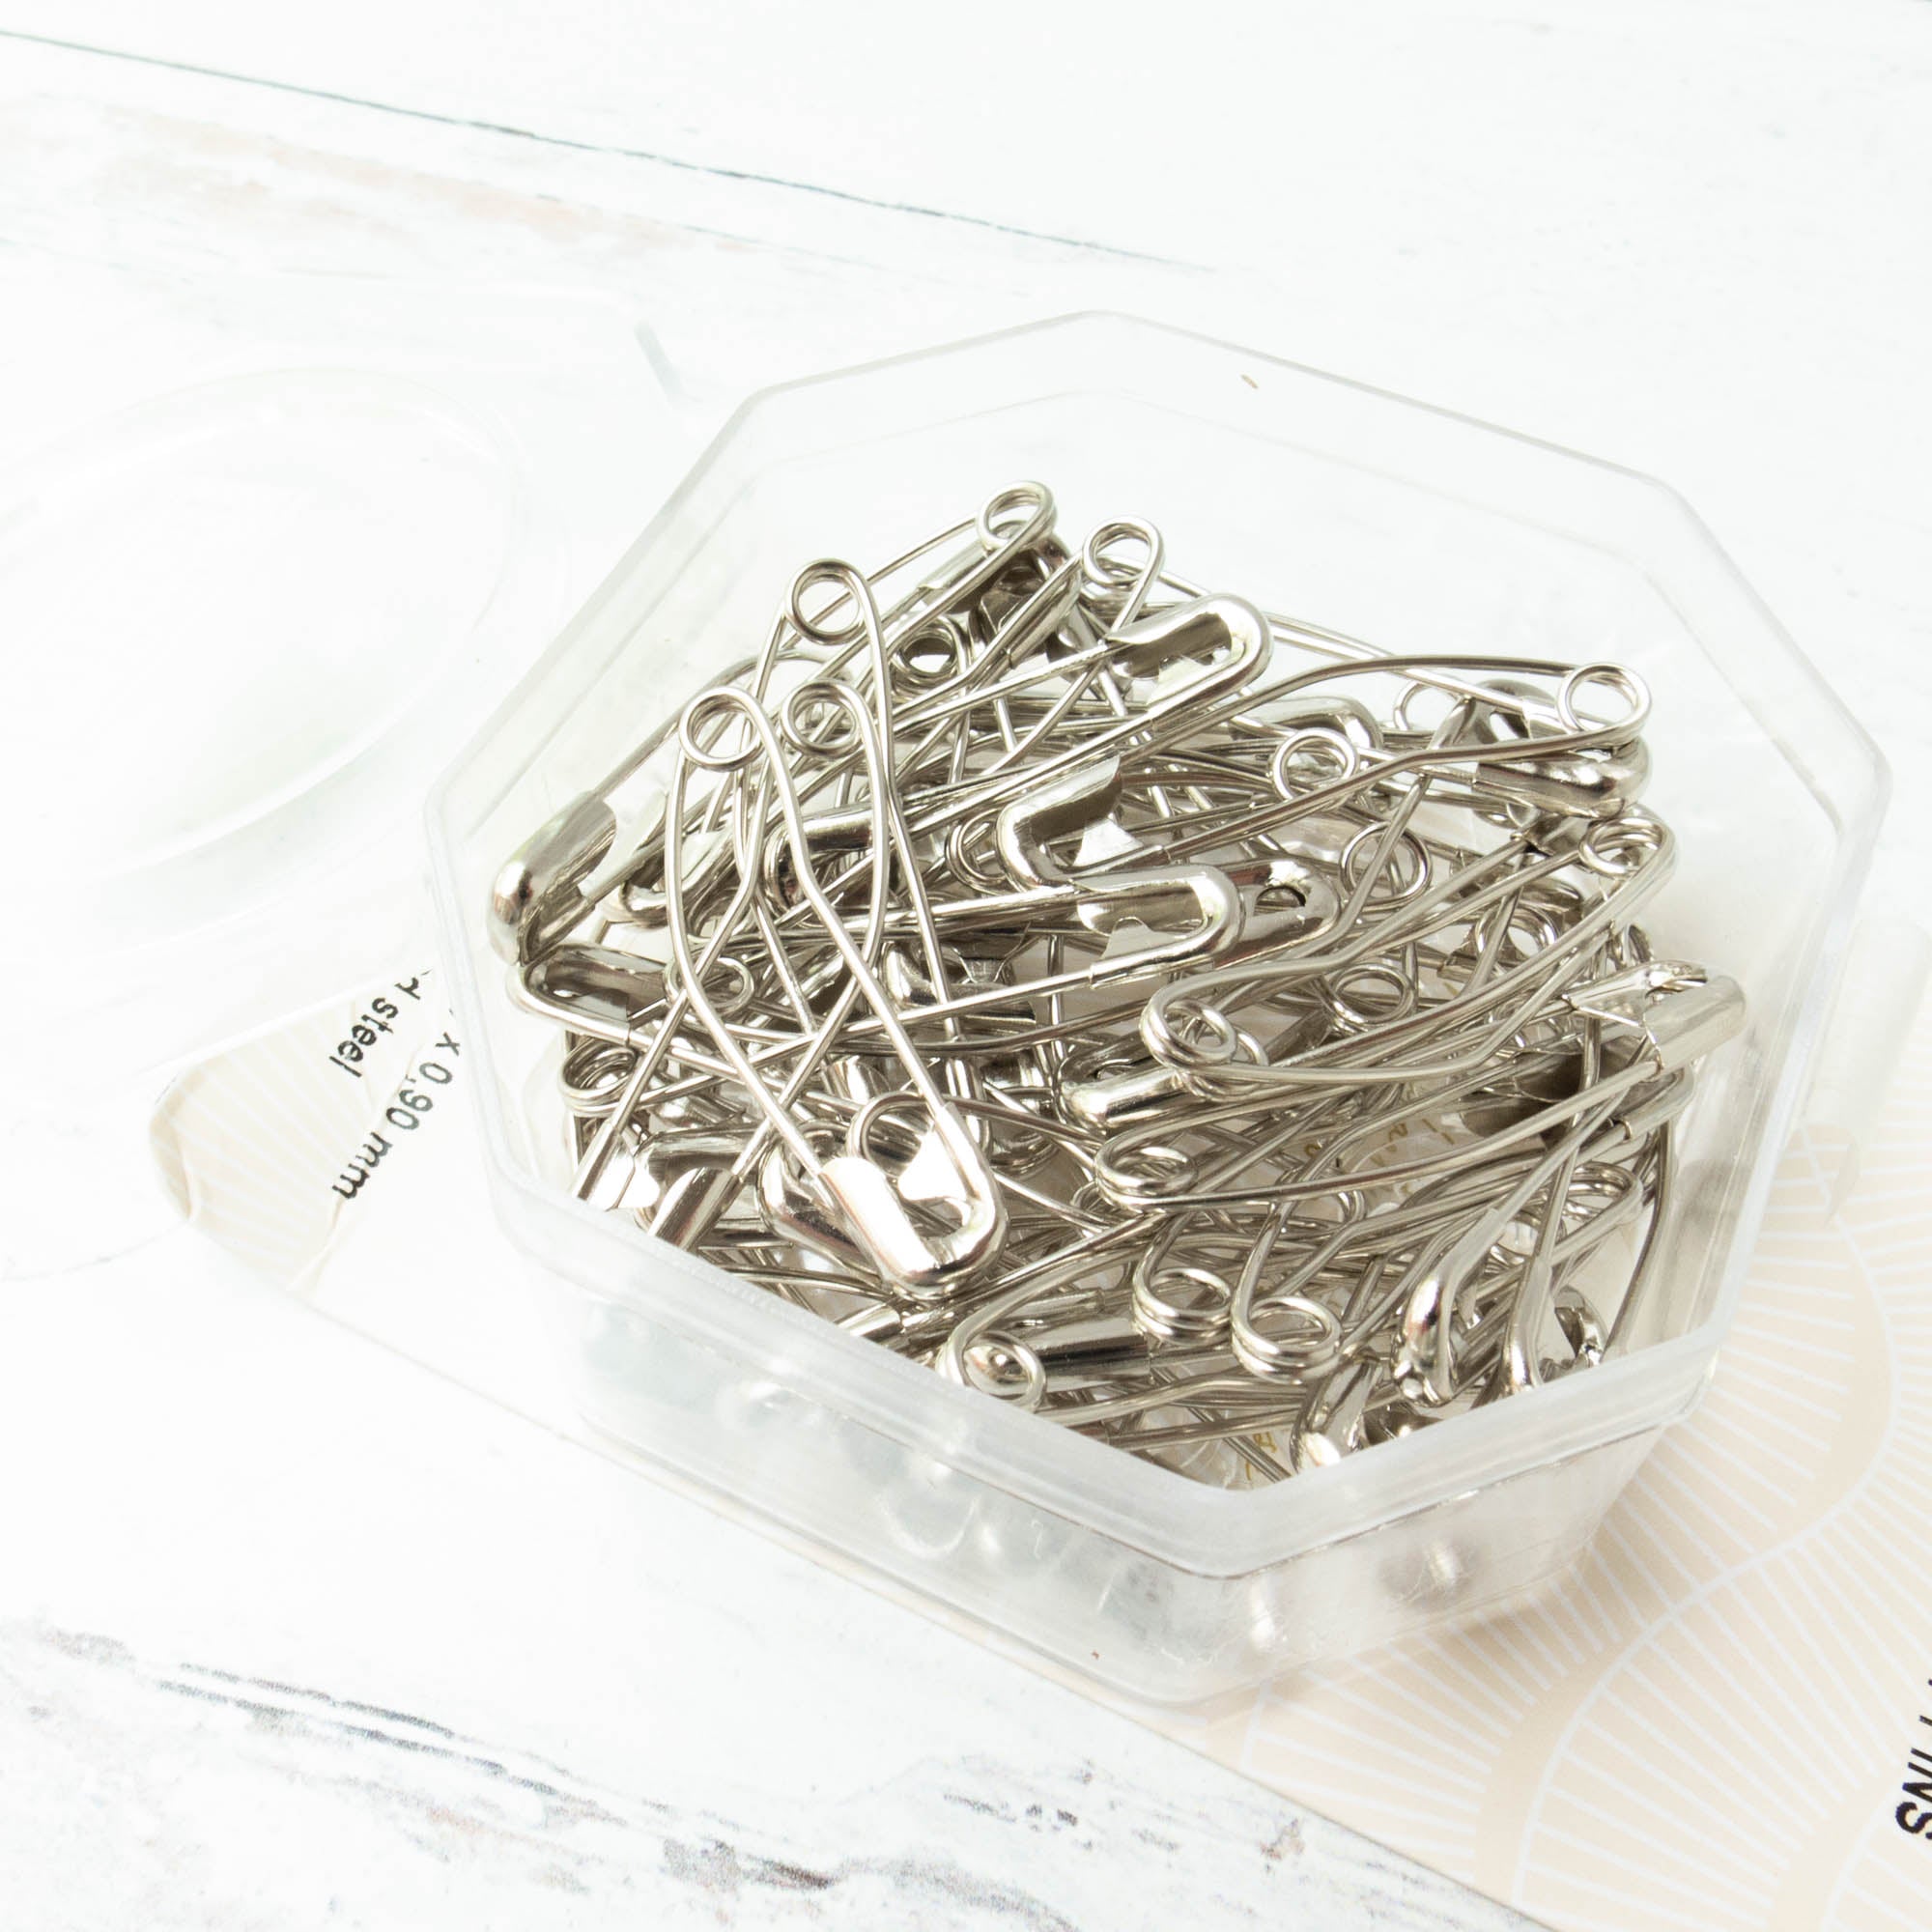 Bohin Curved Safety Pins-Size 2 65/Pkg